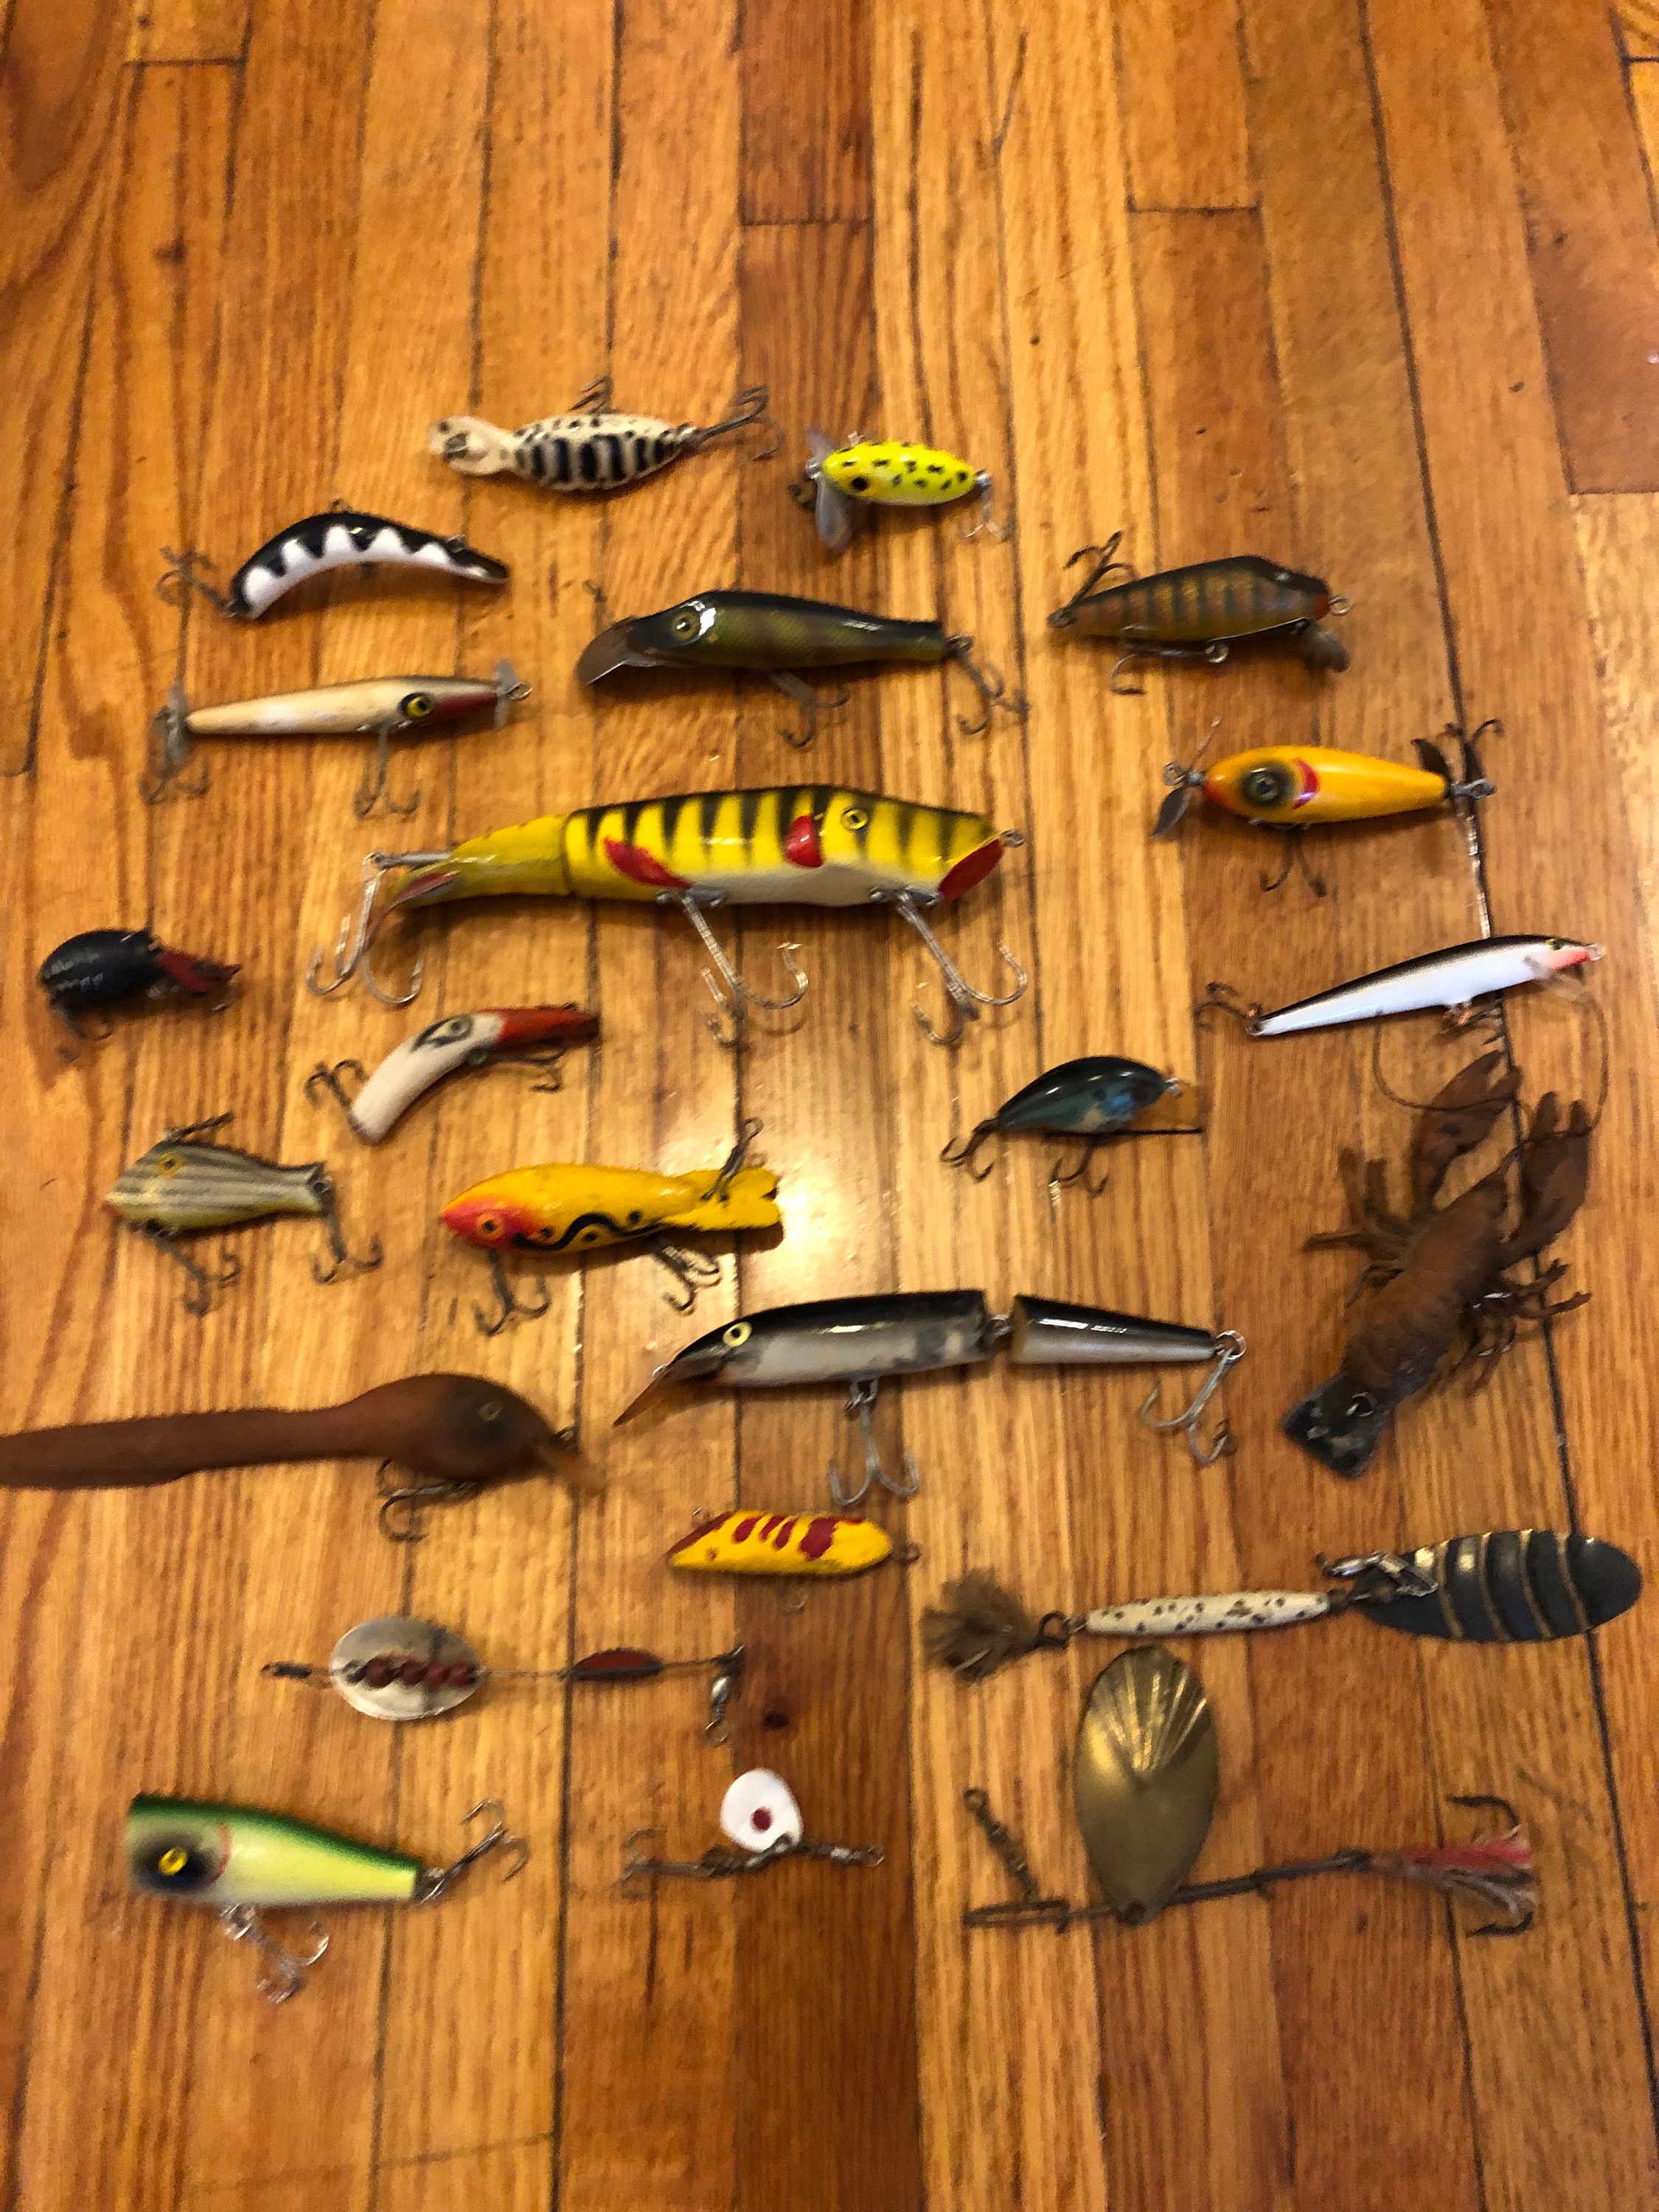 Vintage 4 Inch Shakespeare Wood w/ Glass Eyes Bass-A-Lure Fishing Lure Lot  Y-947